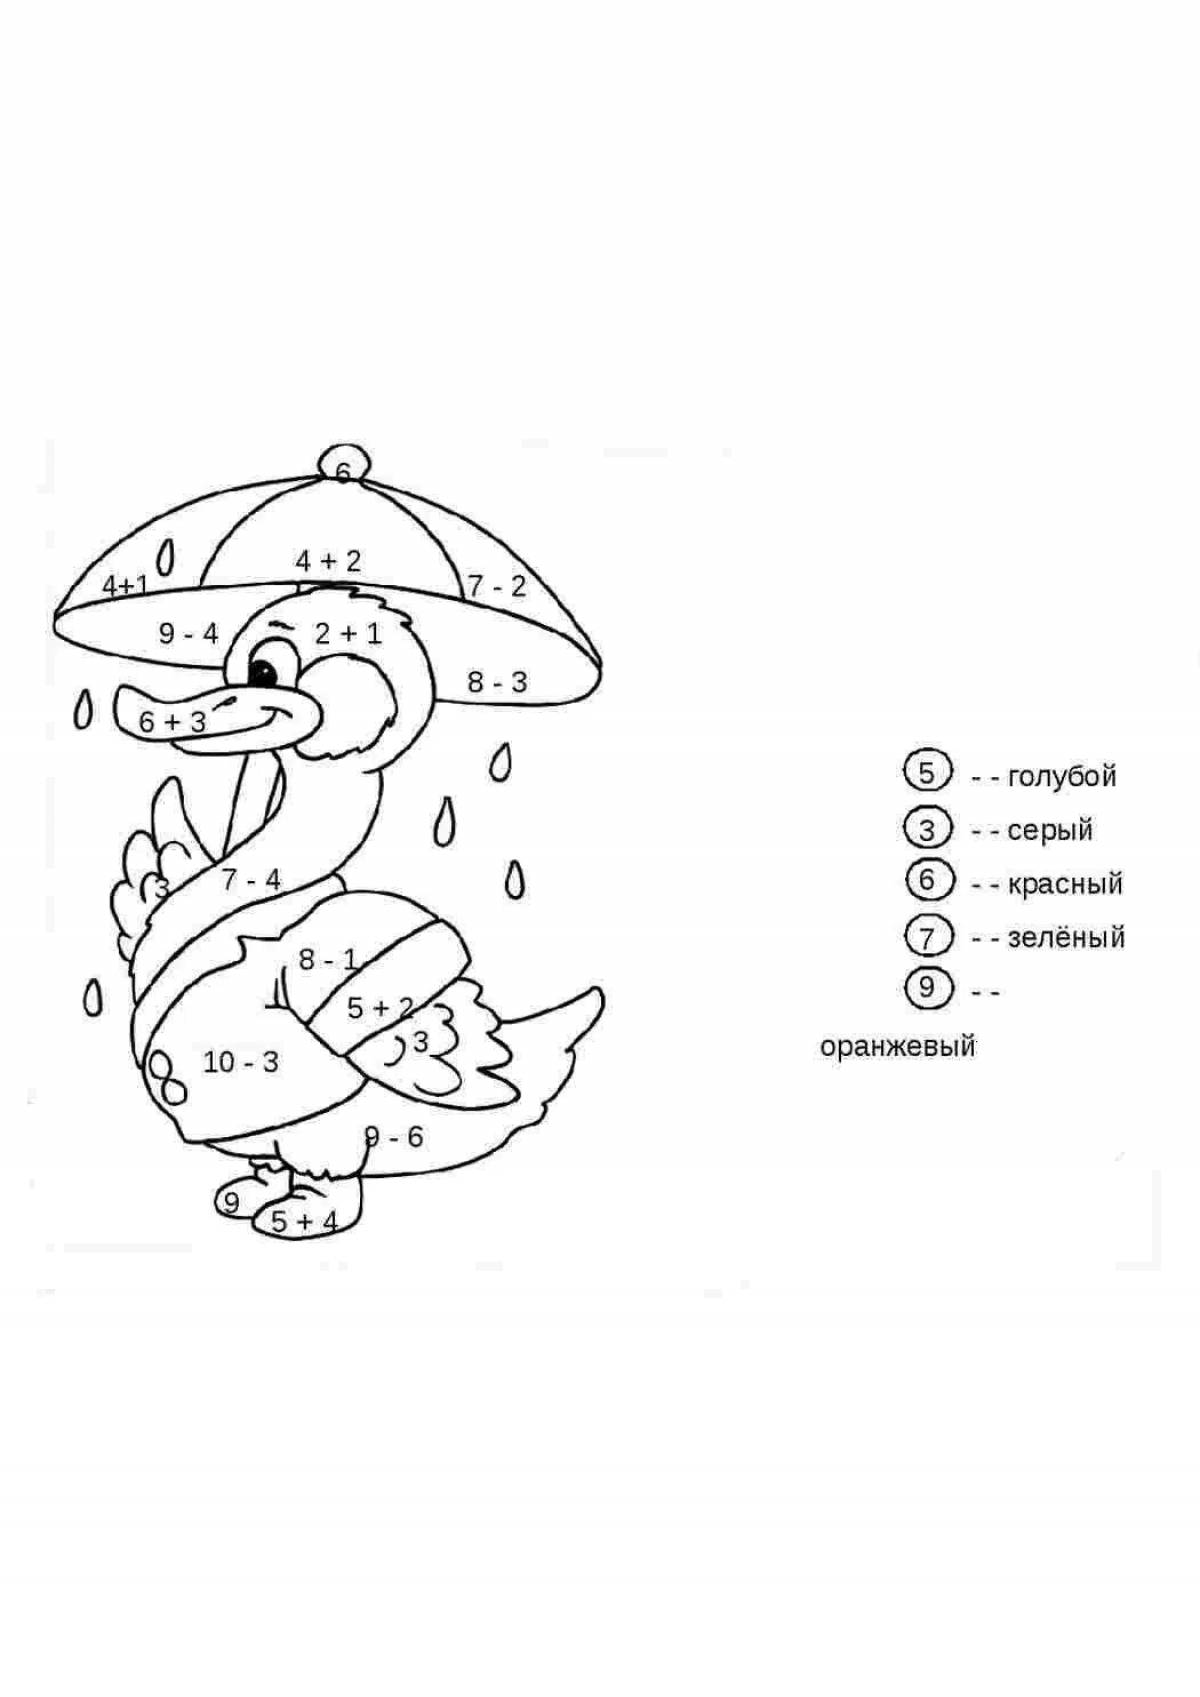 Examples of coloring pages for the little ones